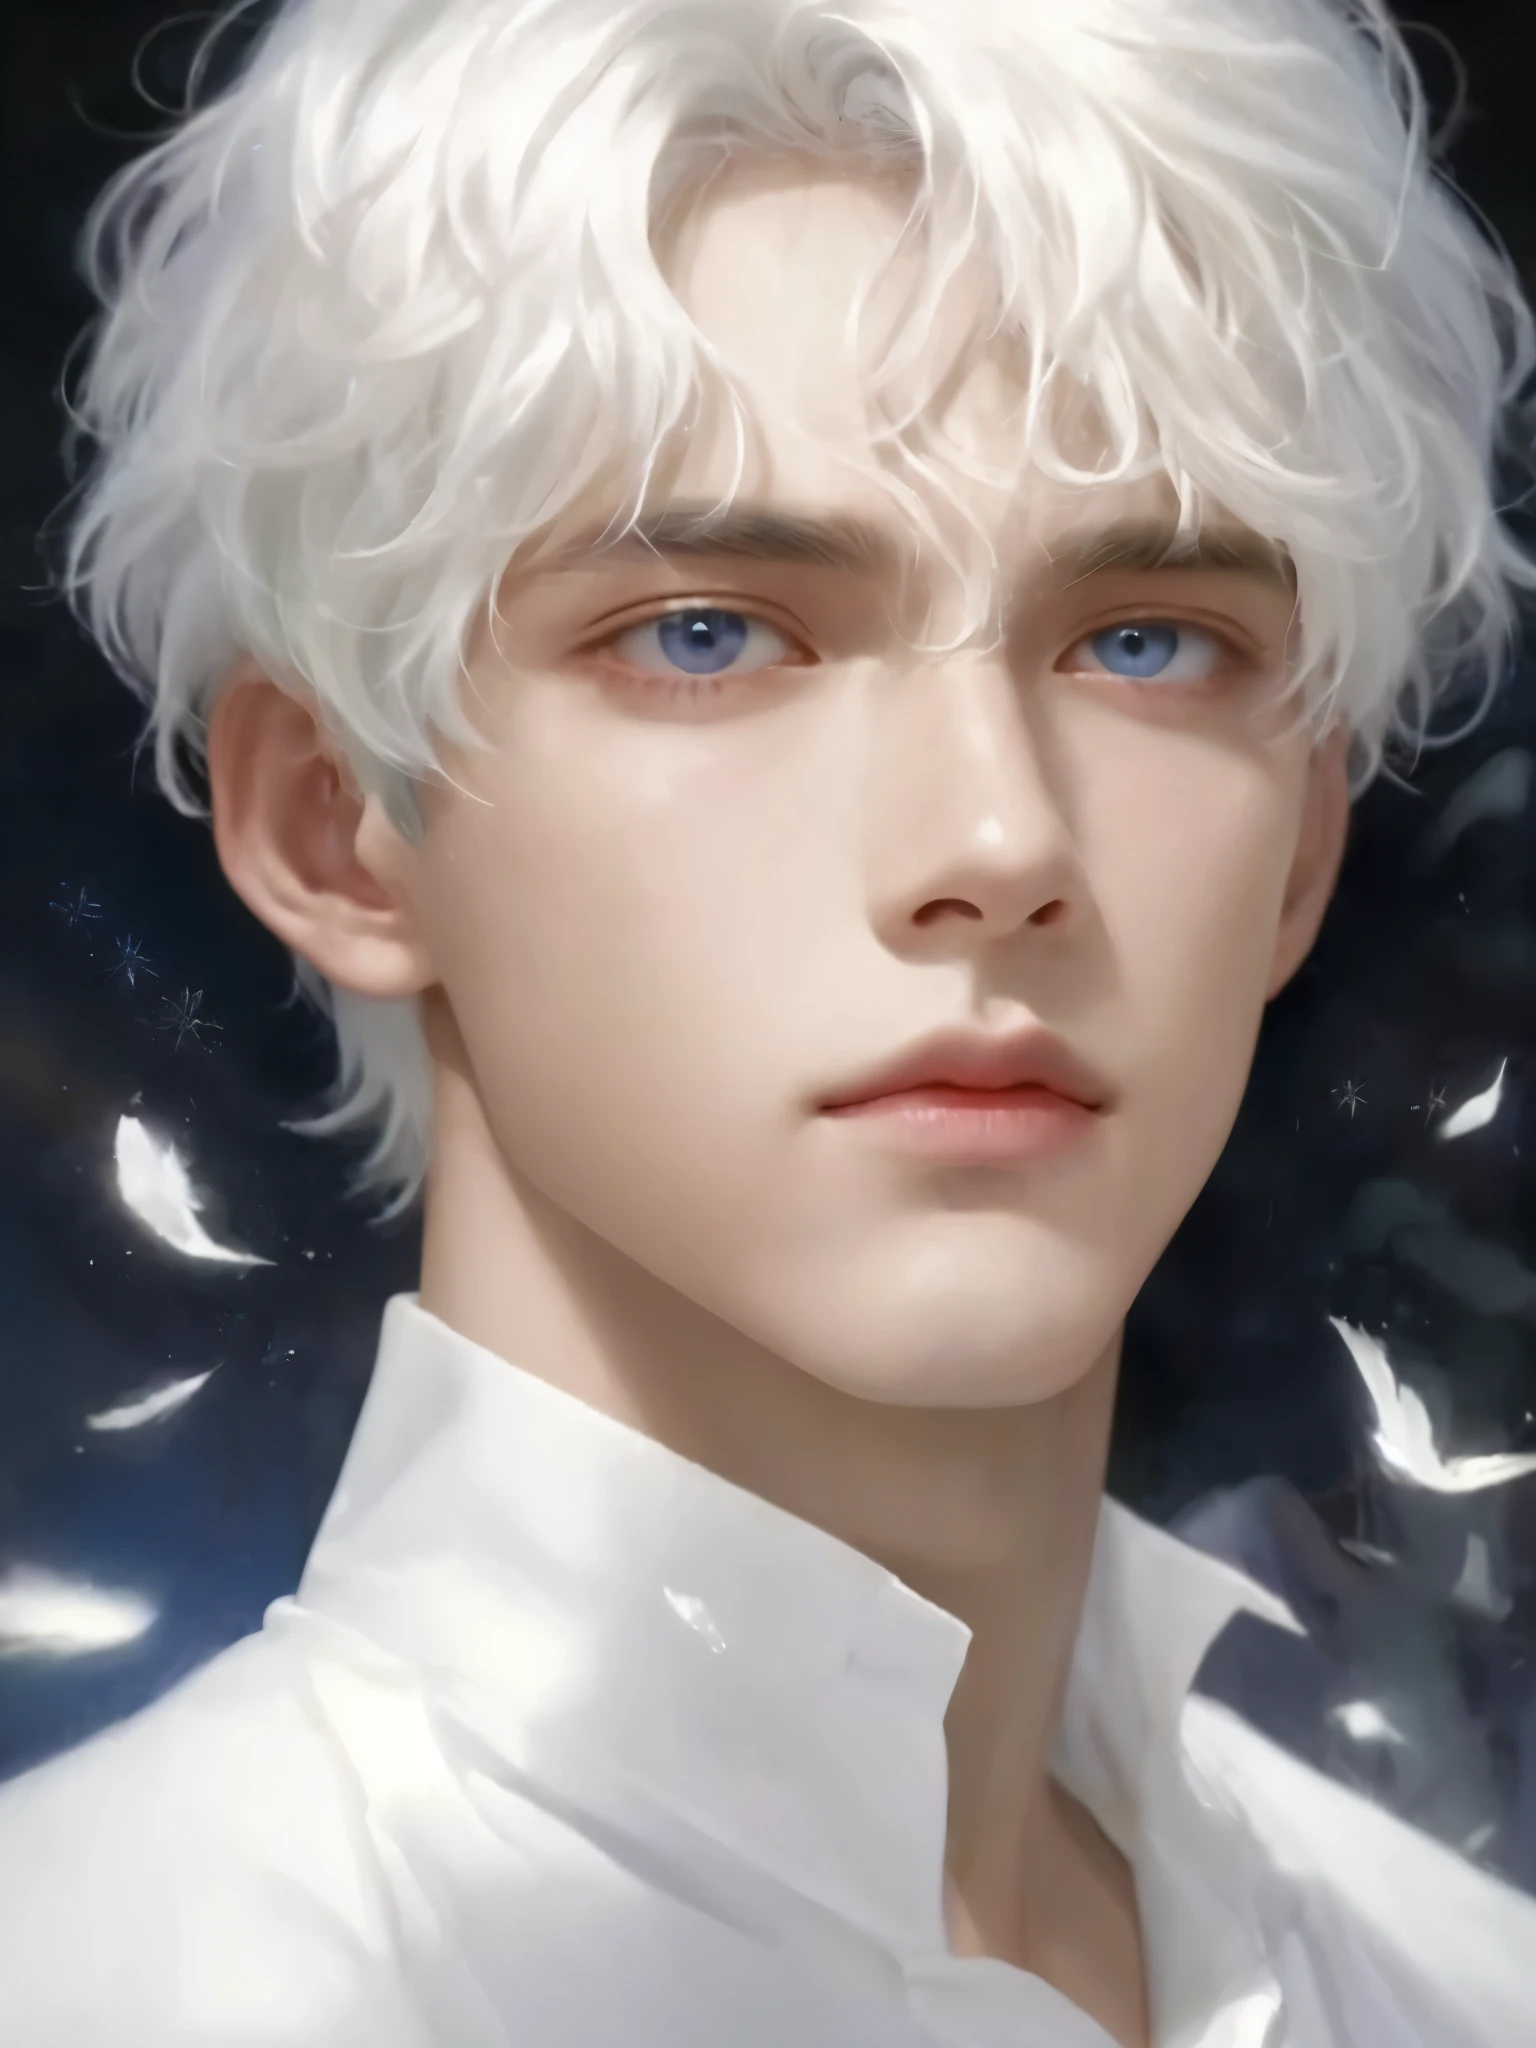 a close up of a person with a white hair and blue eyes, handsome guy in demon slayer art, delicate androgynous prince, beautiful androgynous prince, white haired, inspiration from Yanjun Cheng, tall anime boy with blue eyes, obra de arte al estilo de Guweiz, Guweiz, cai xukun, white haired